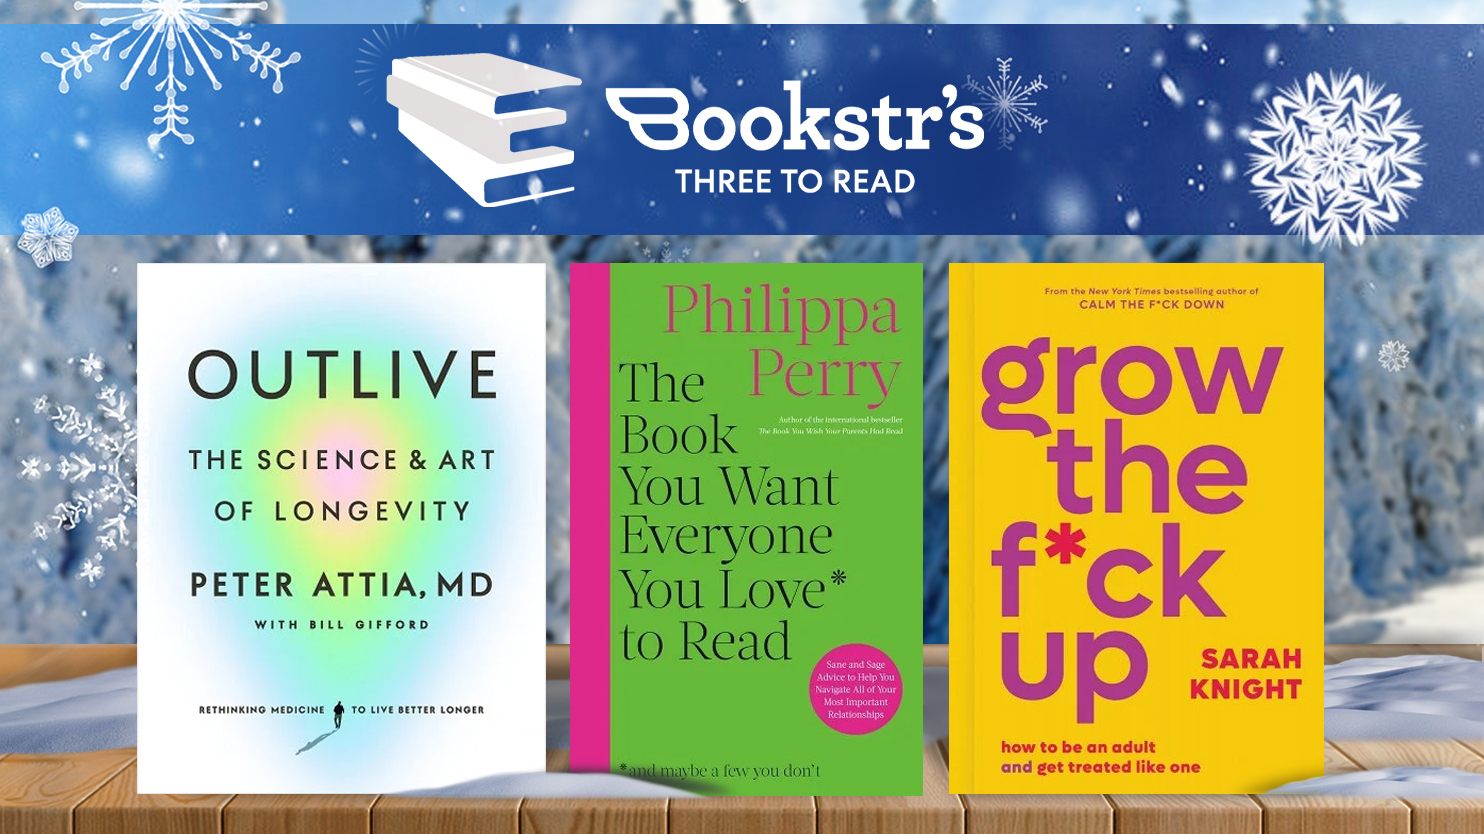 3 self-improvement books on a winter background for three to read recommendations.